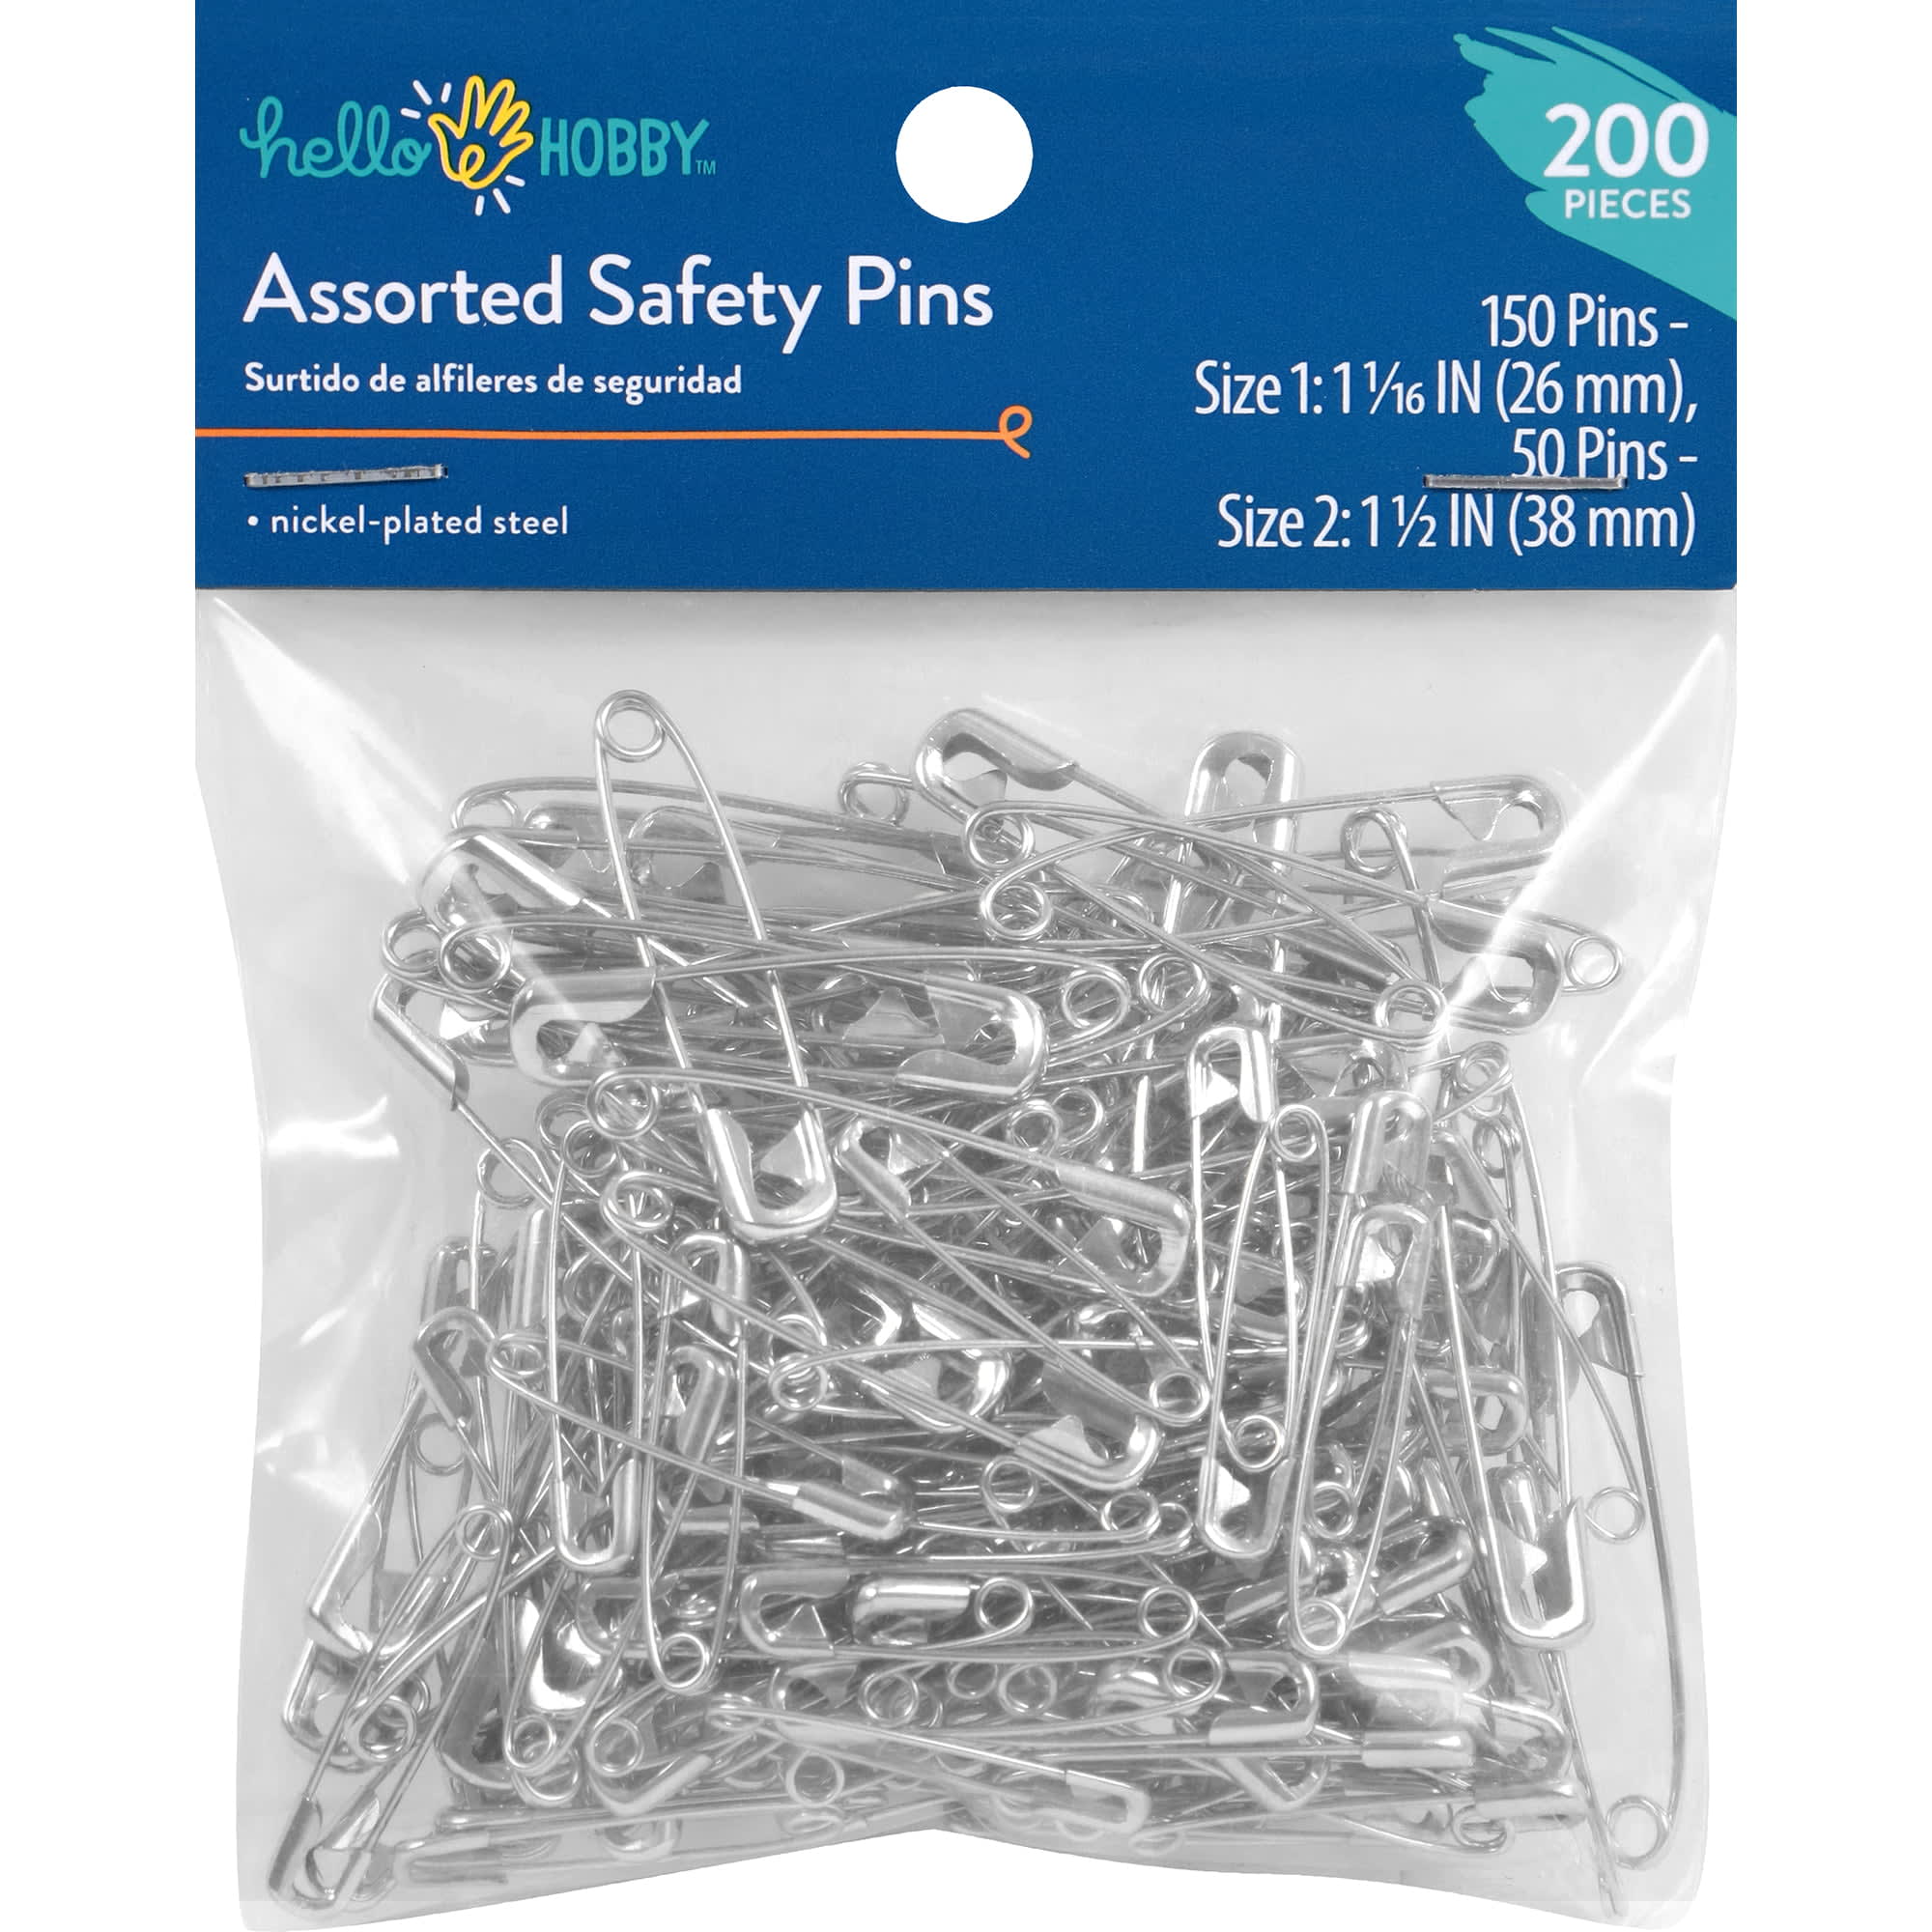 Dritz Decorating T-Pin, 2 - 100 count